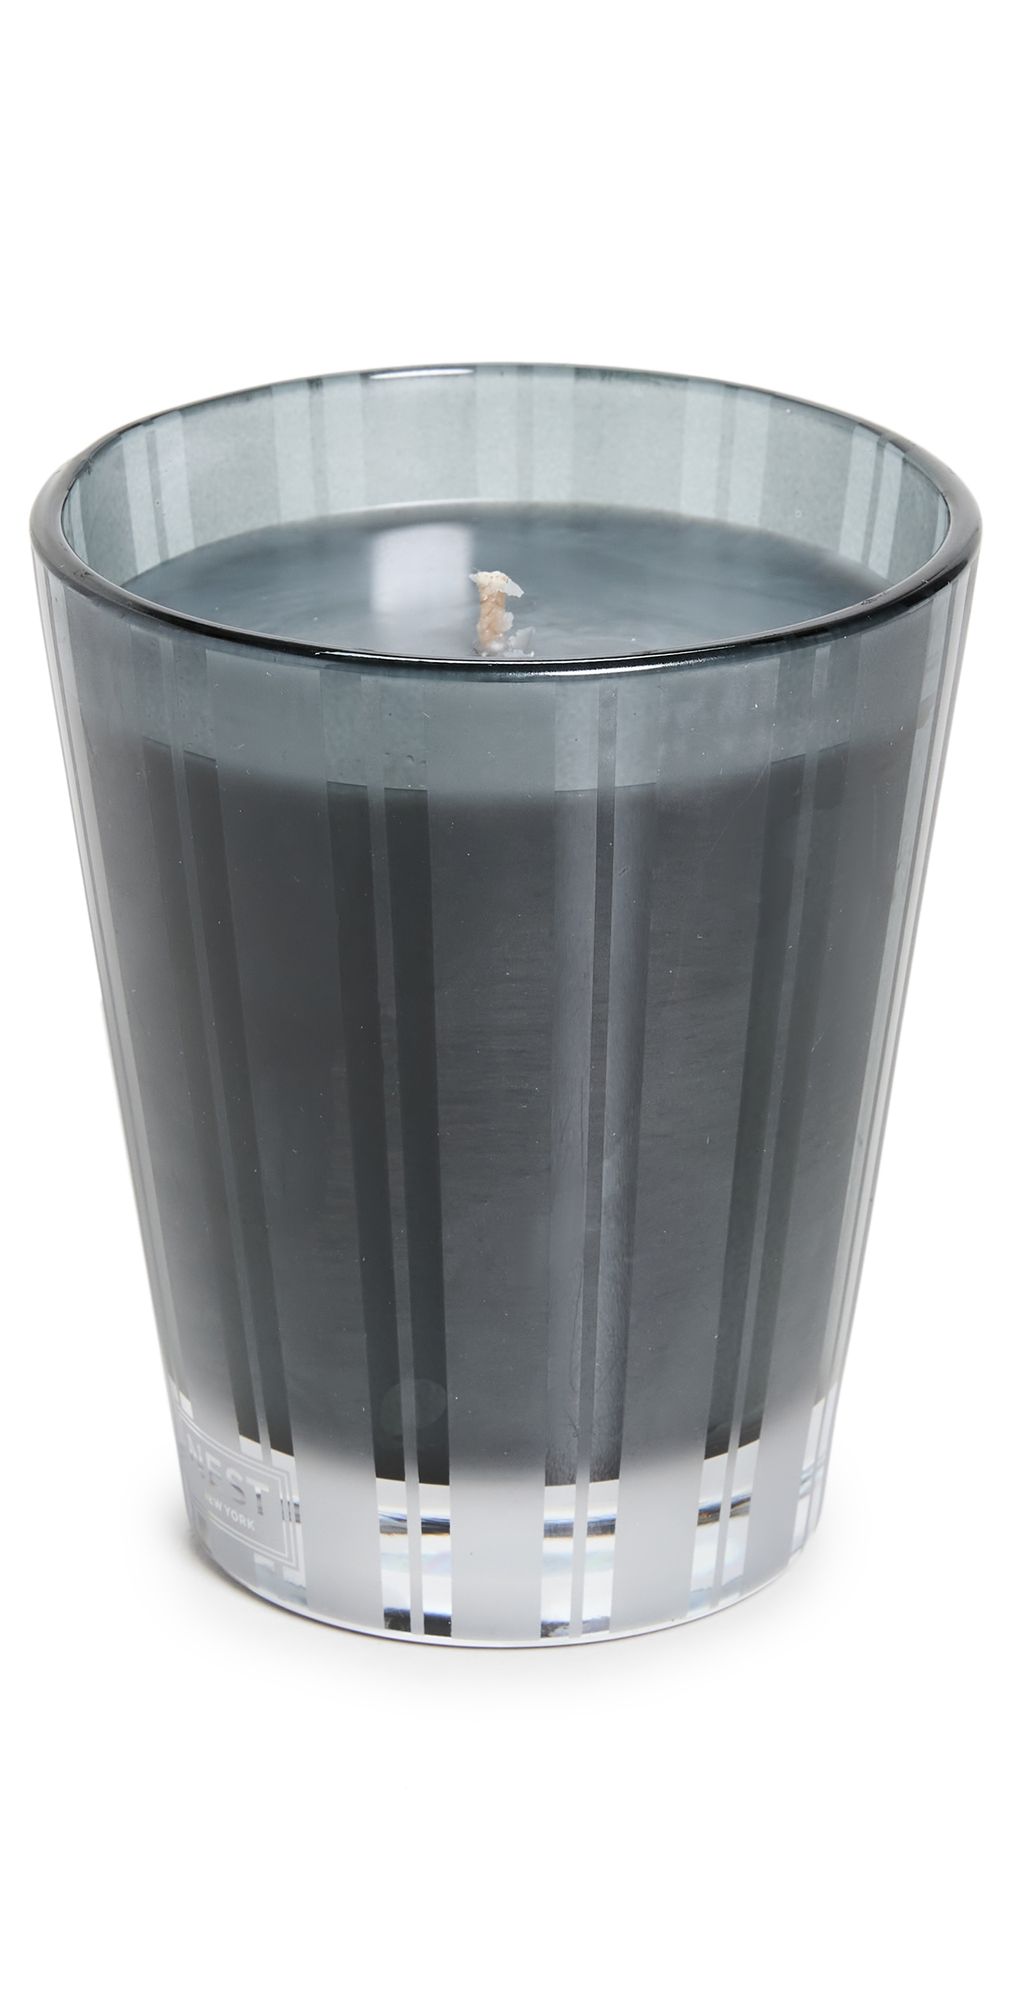 Nest Fragrance Charcoal Woods Classic Candle | Shopbop